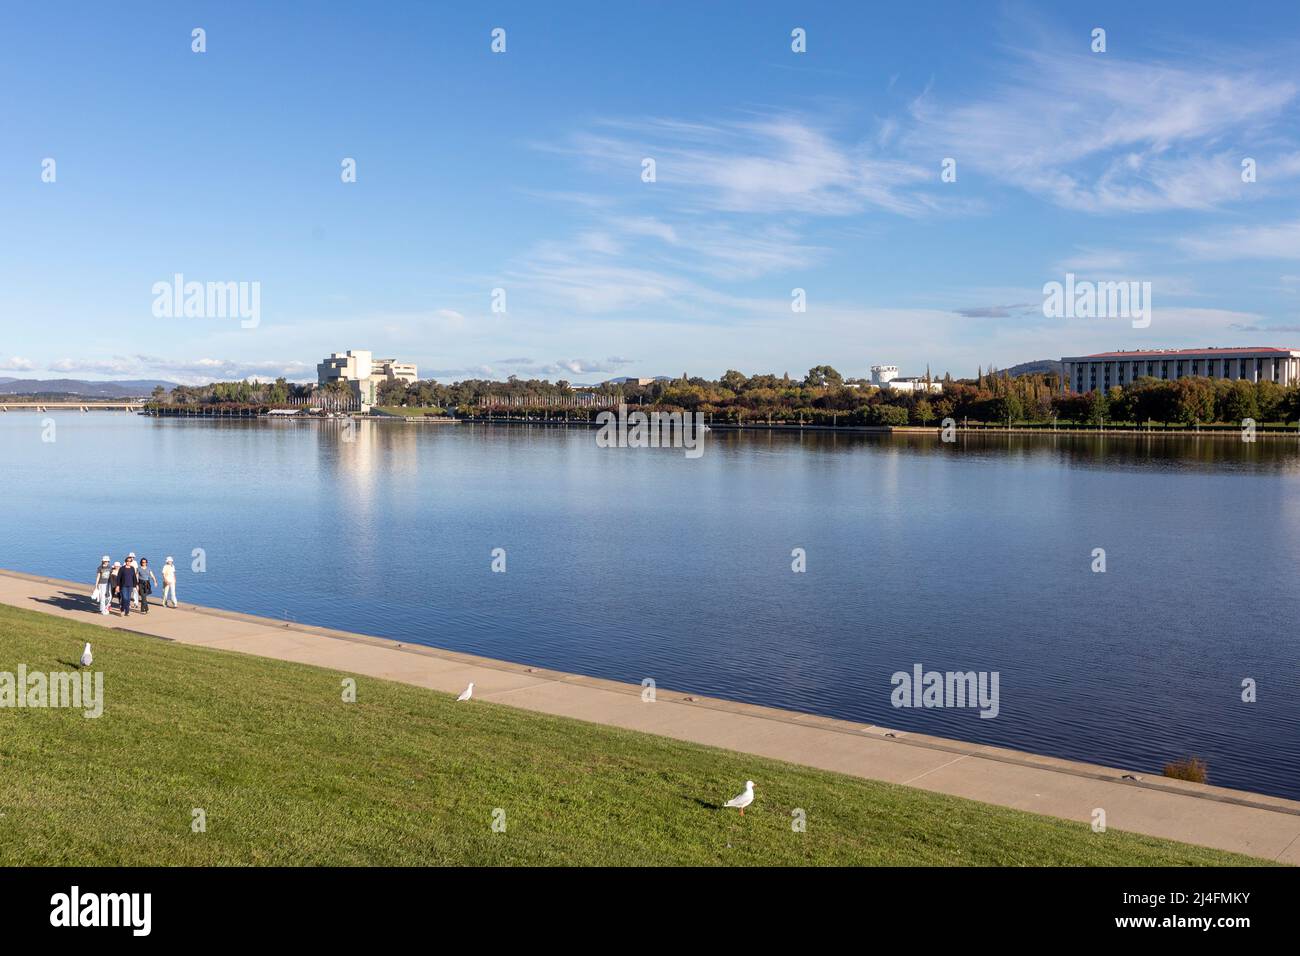 Lake Burley Griffin in Canberra Australia on a blue sky autumn day Stock Photo